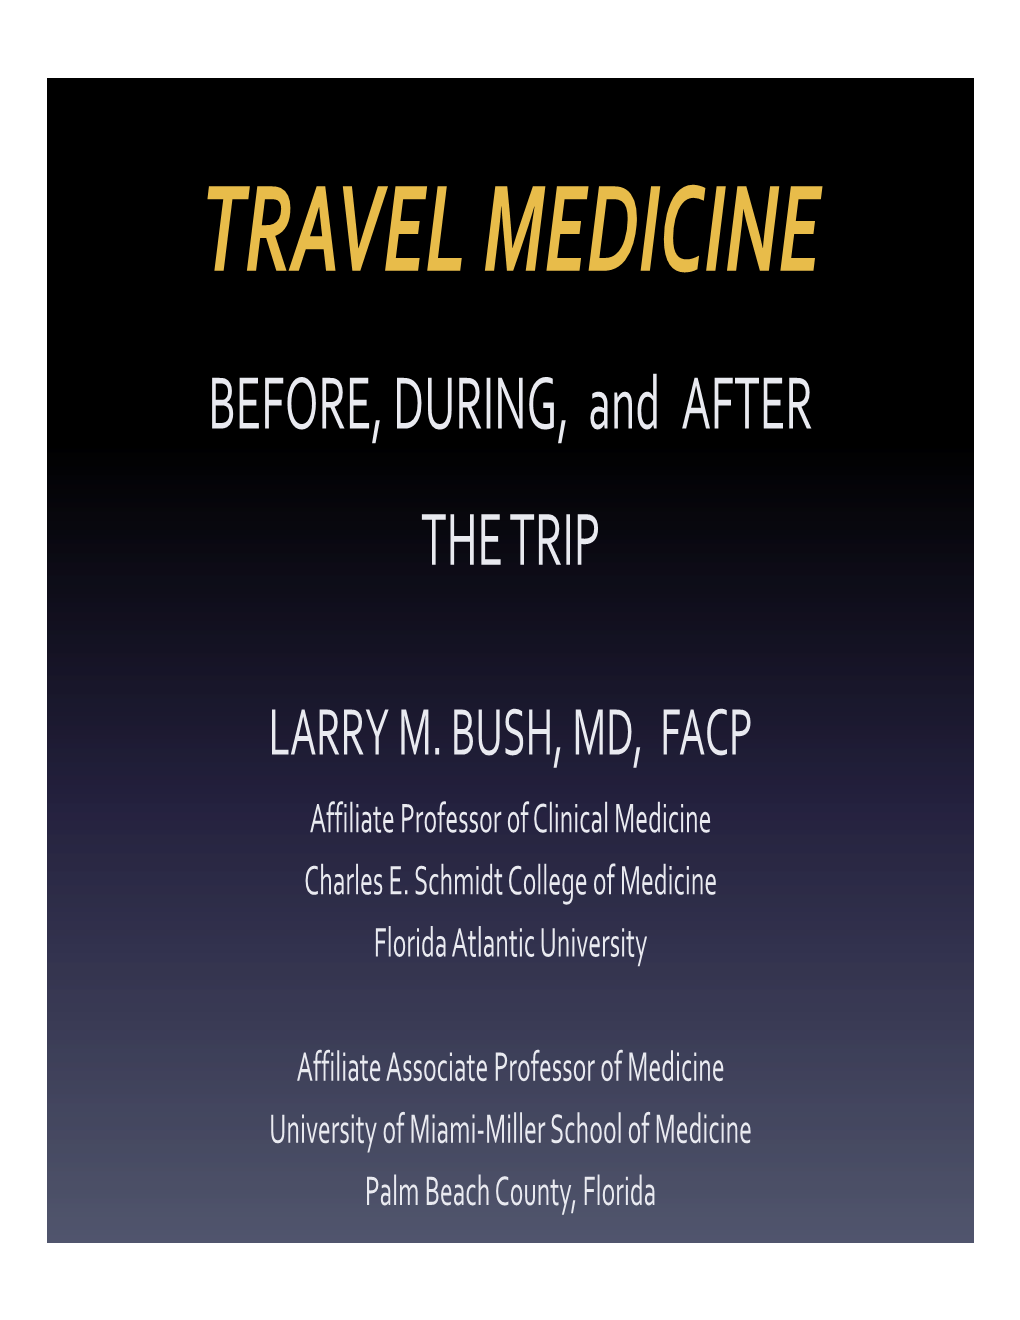 TRAVEL MEDICINE BEFORE, DURING, and AFTER the TRIP